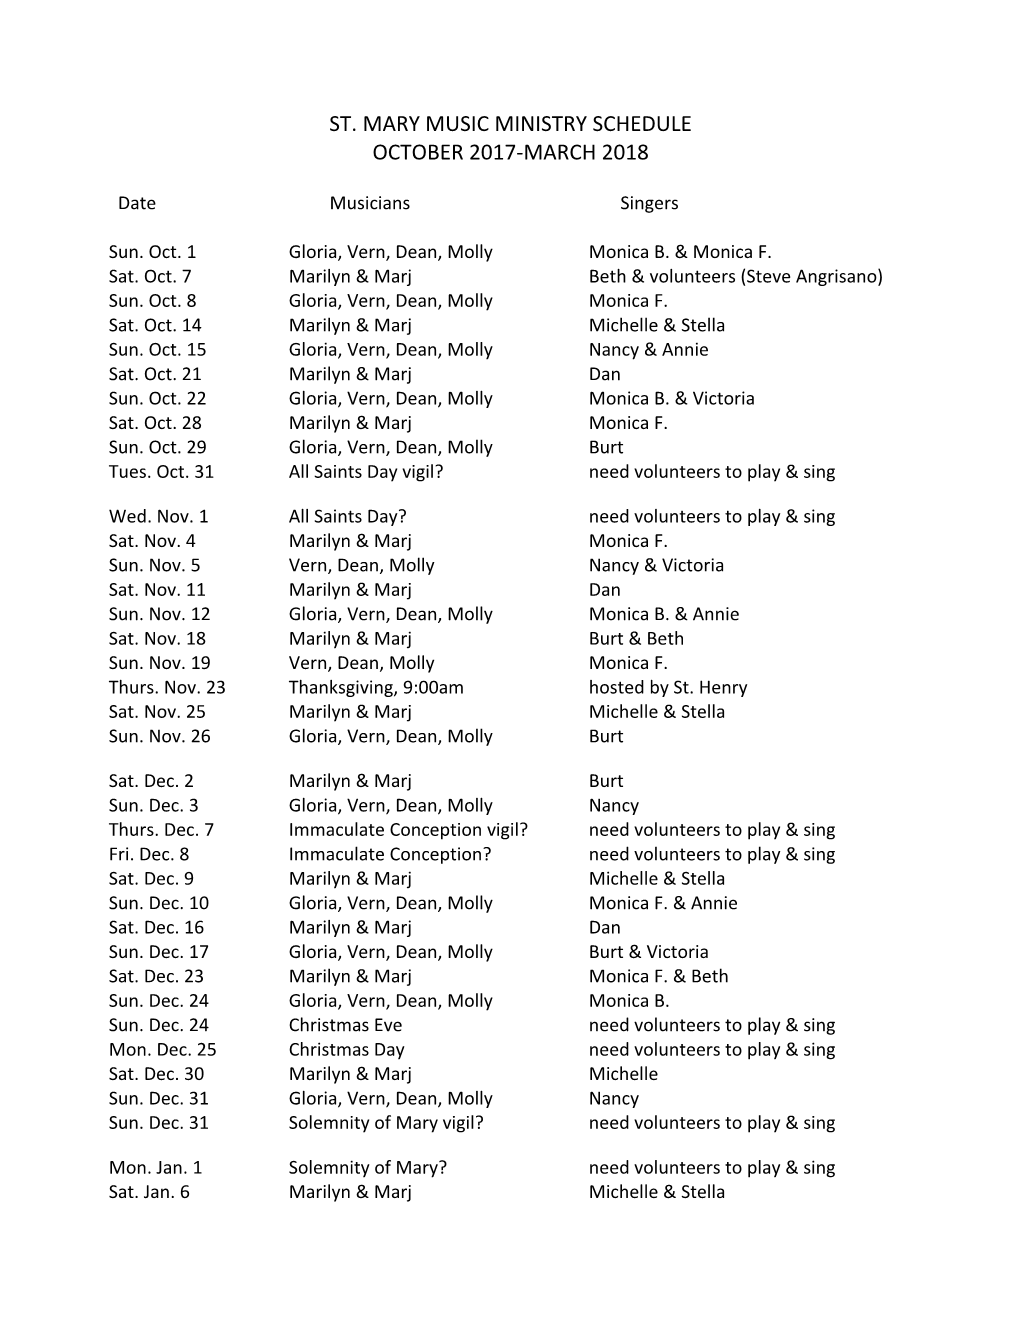 St. Mary Music Ministry Schedule